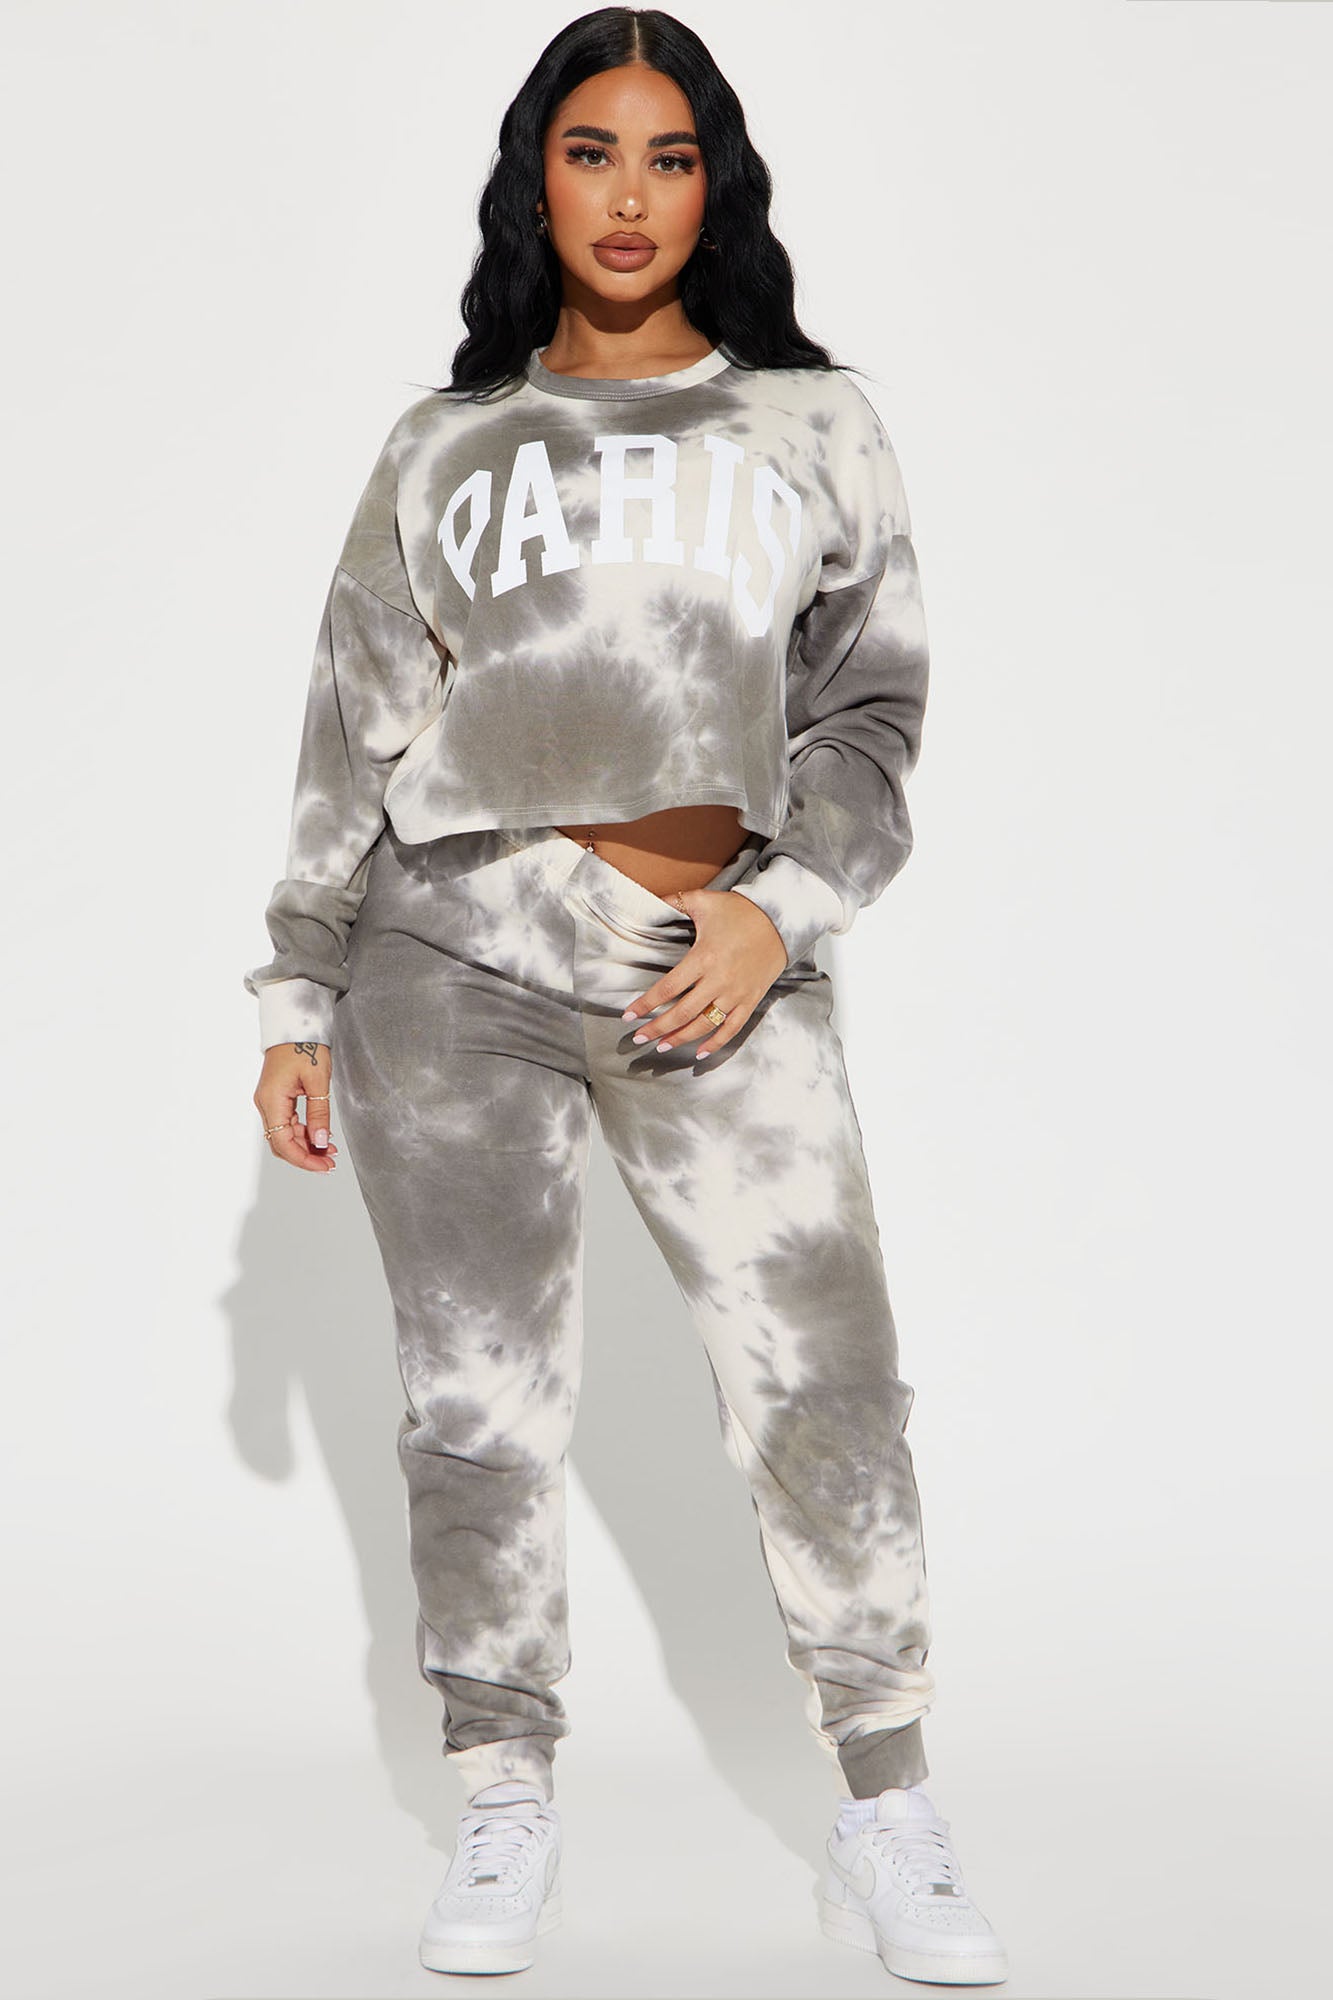 Mocha Tie Dye Jogger Set - Outfit Sets - The Calm and Collected